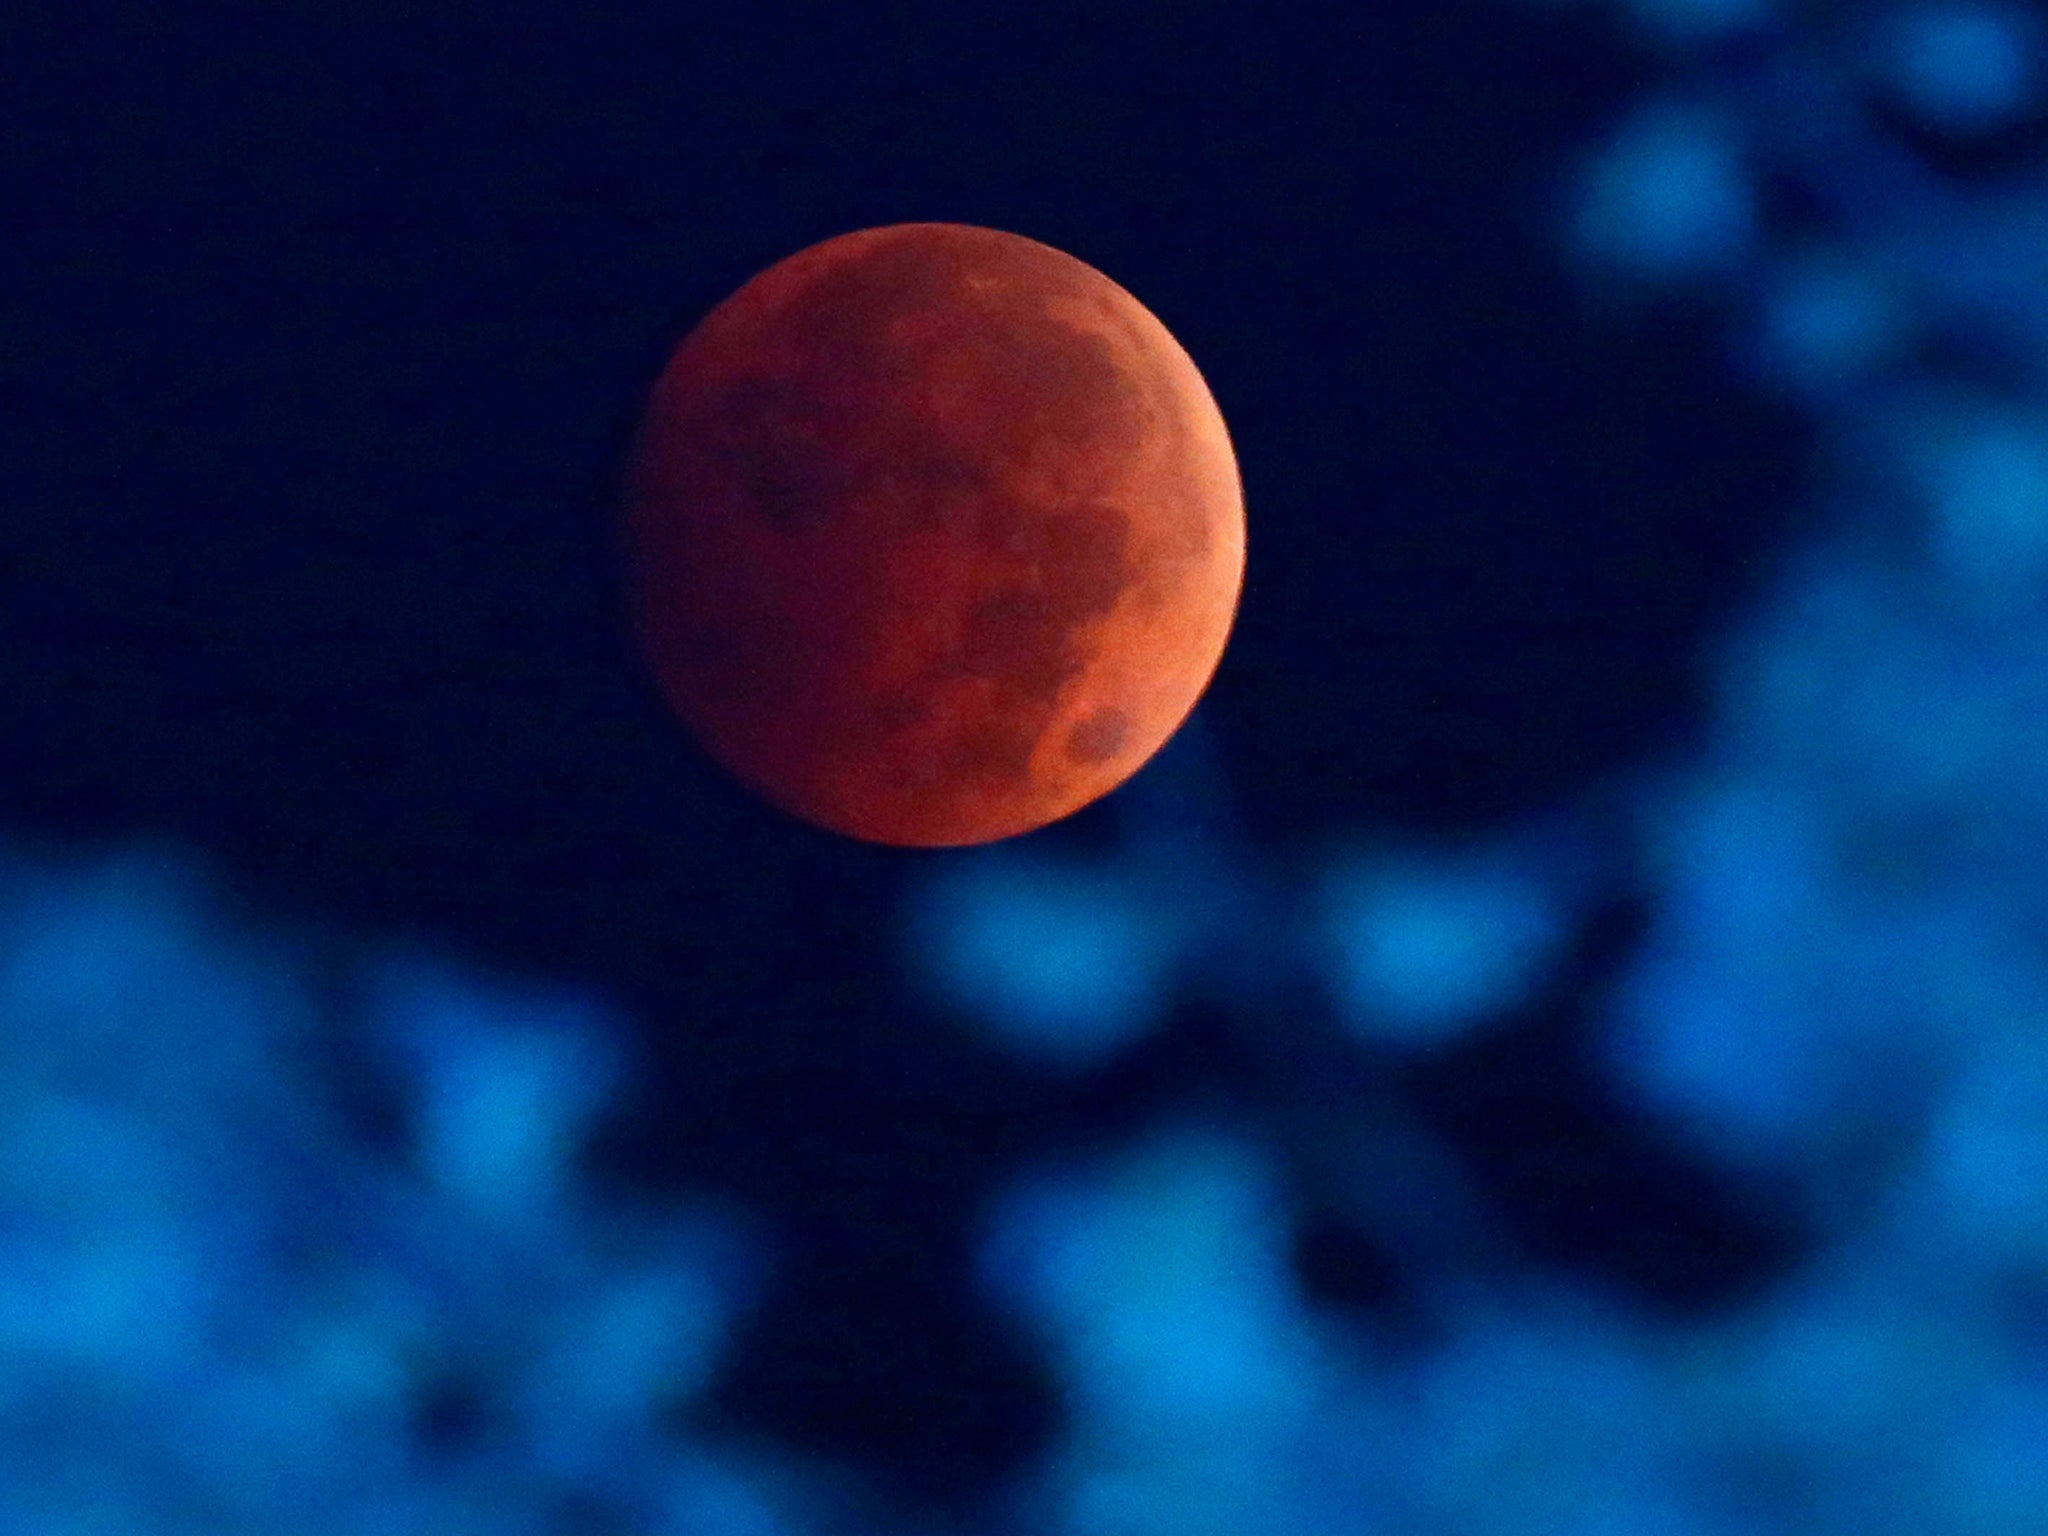 The Earth's shadow renders the moon during a total lunar eclipse over Milwaukee, USA